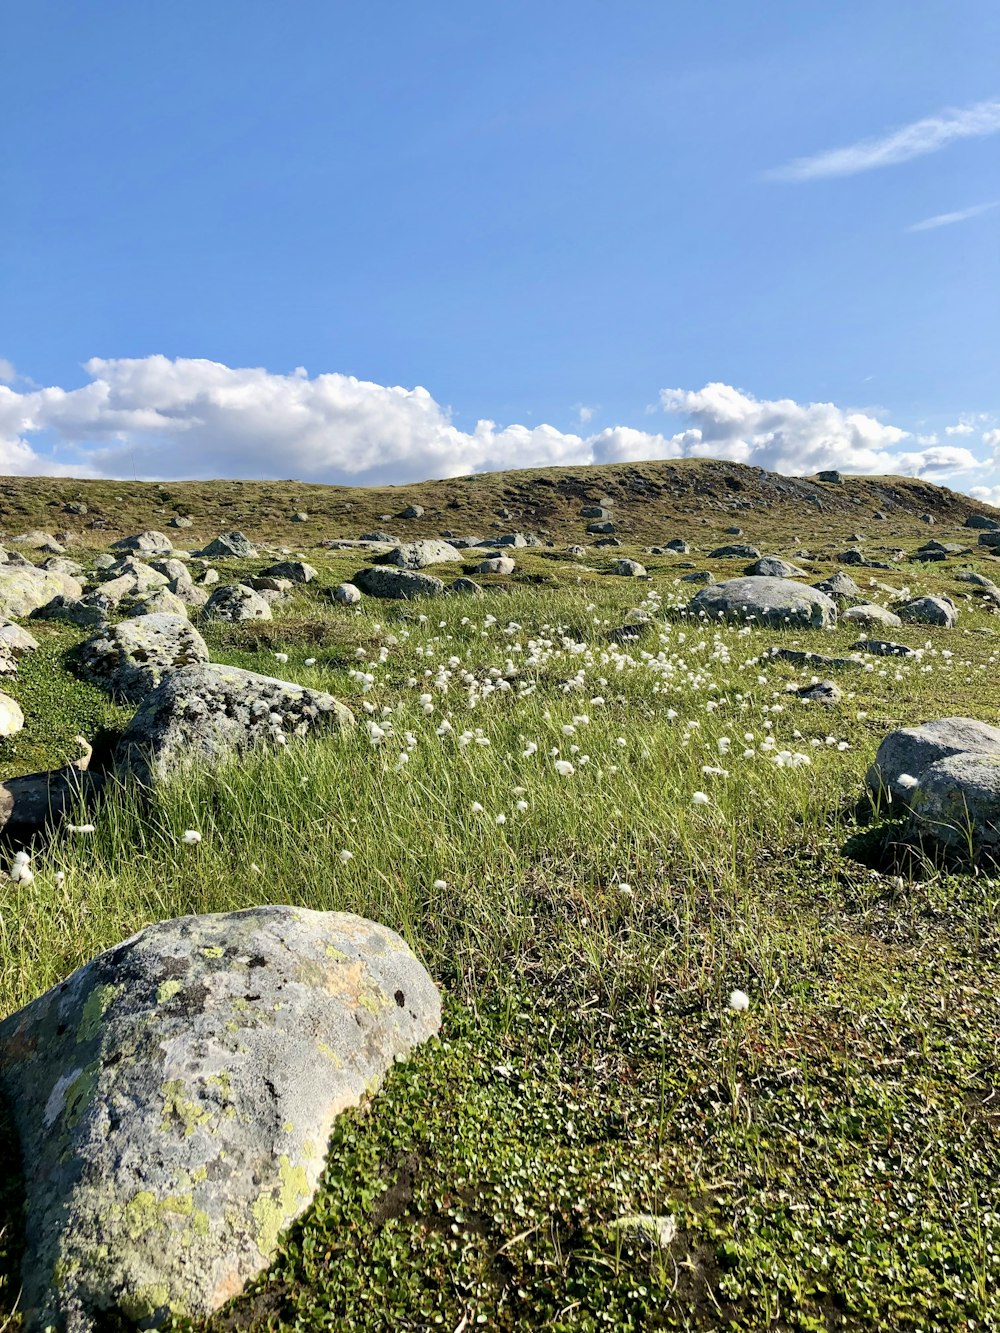 a grassy field with rocks and flowers in the foreground